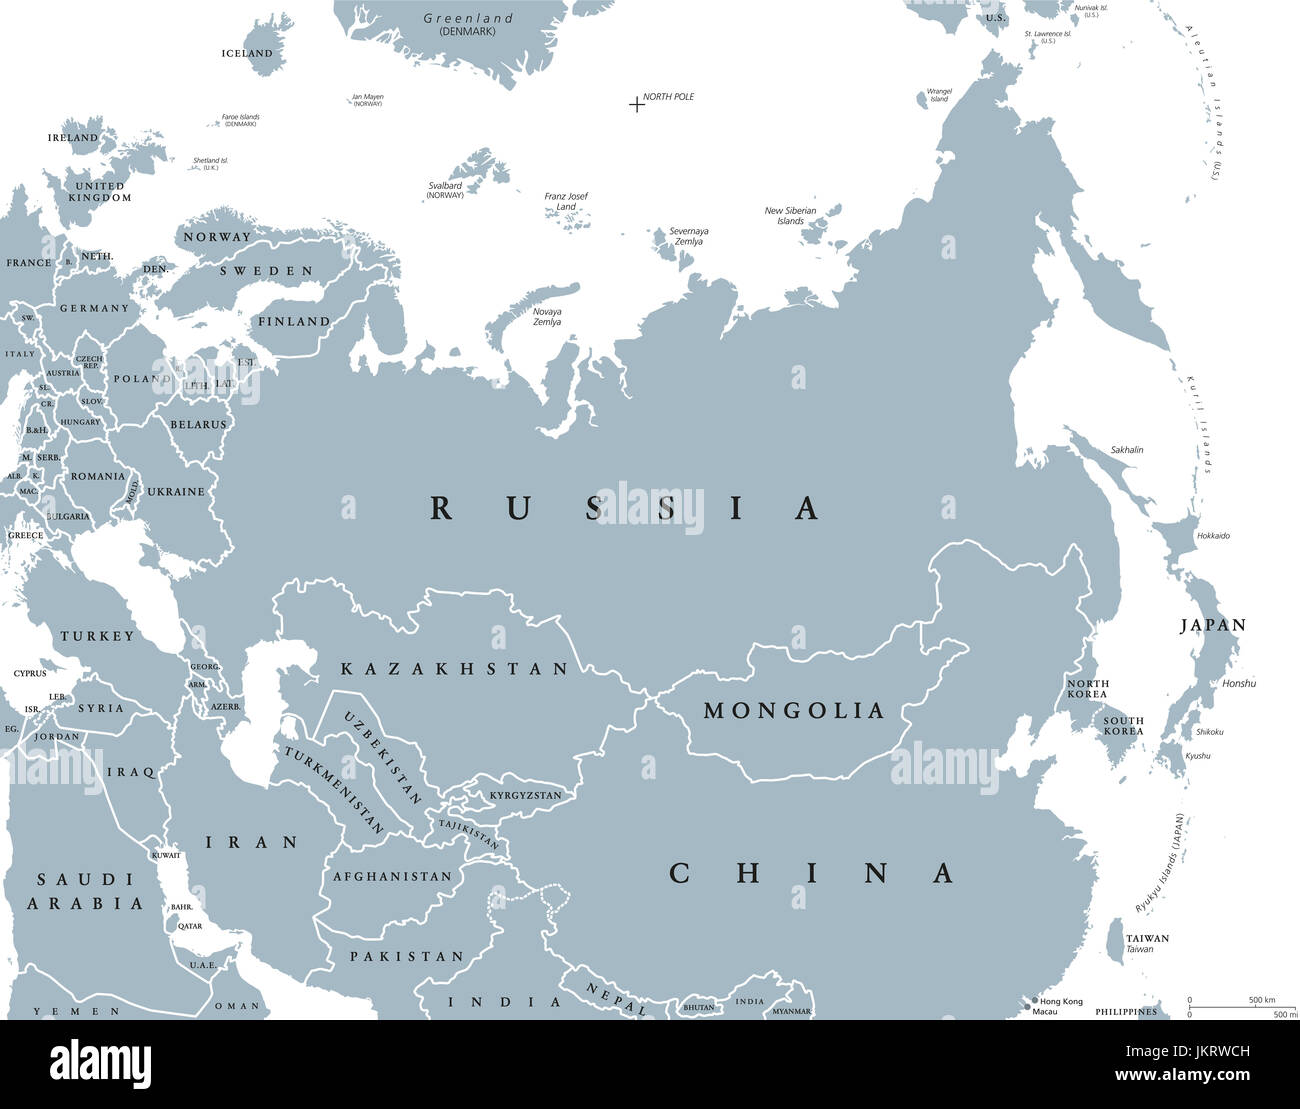 Eurasia political map with countries and borders. Combined continental landmass of Europe and Asia located in Northern and Eastern Hemispheres. Stock Photo